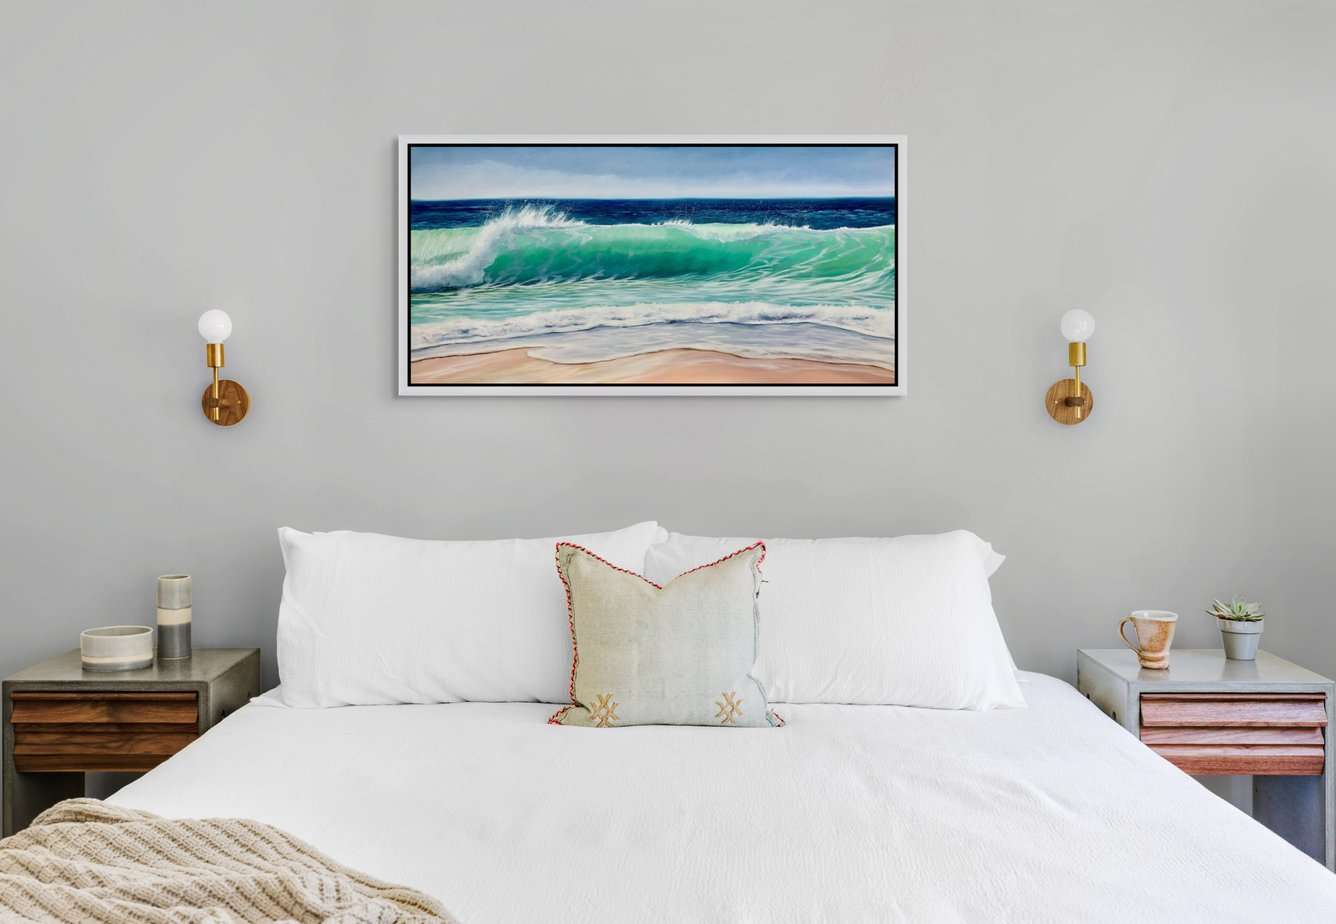 Sea Green Wave framed painting in a bedroom setting